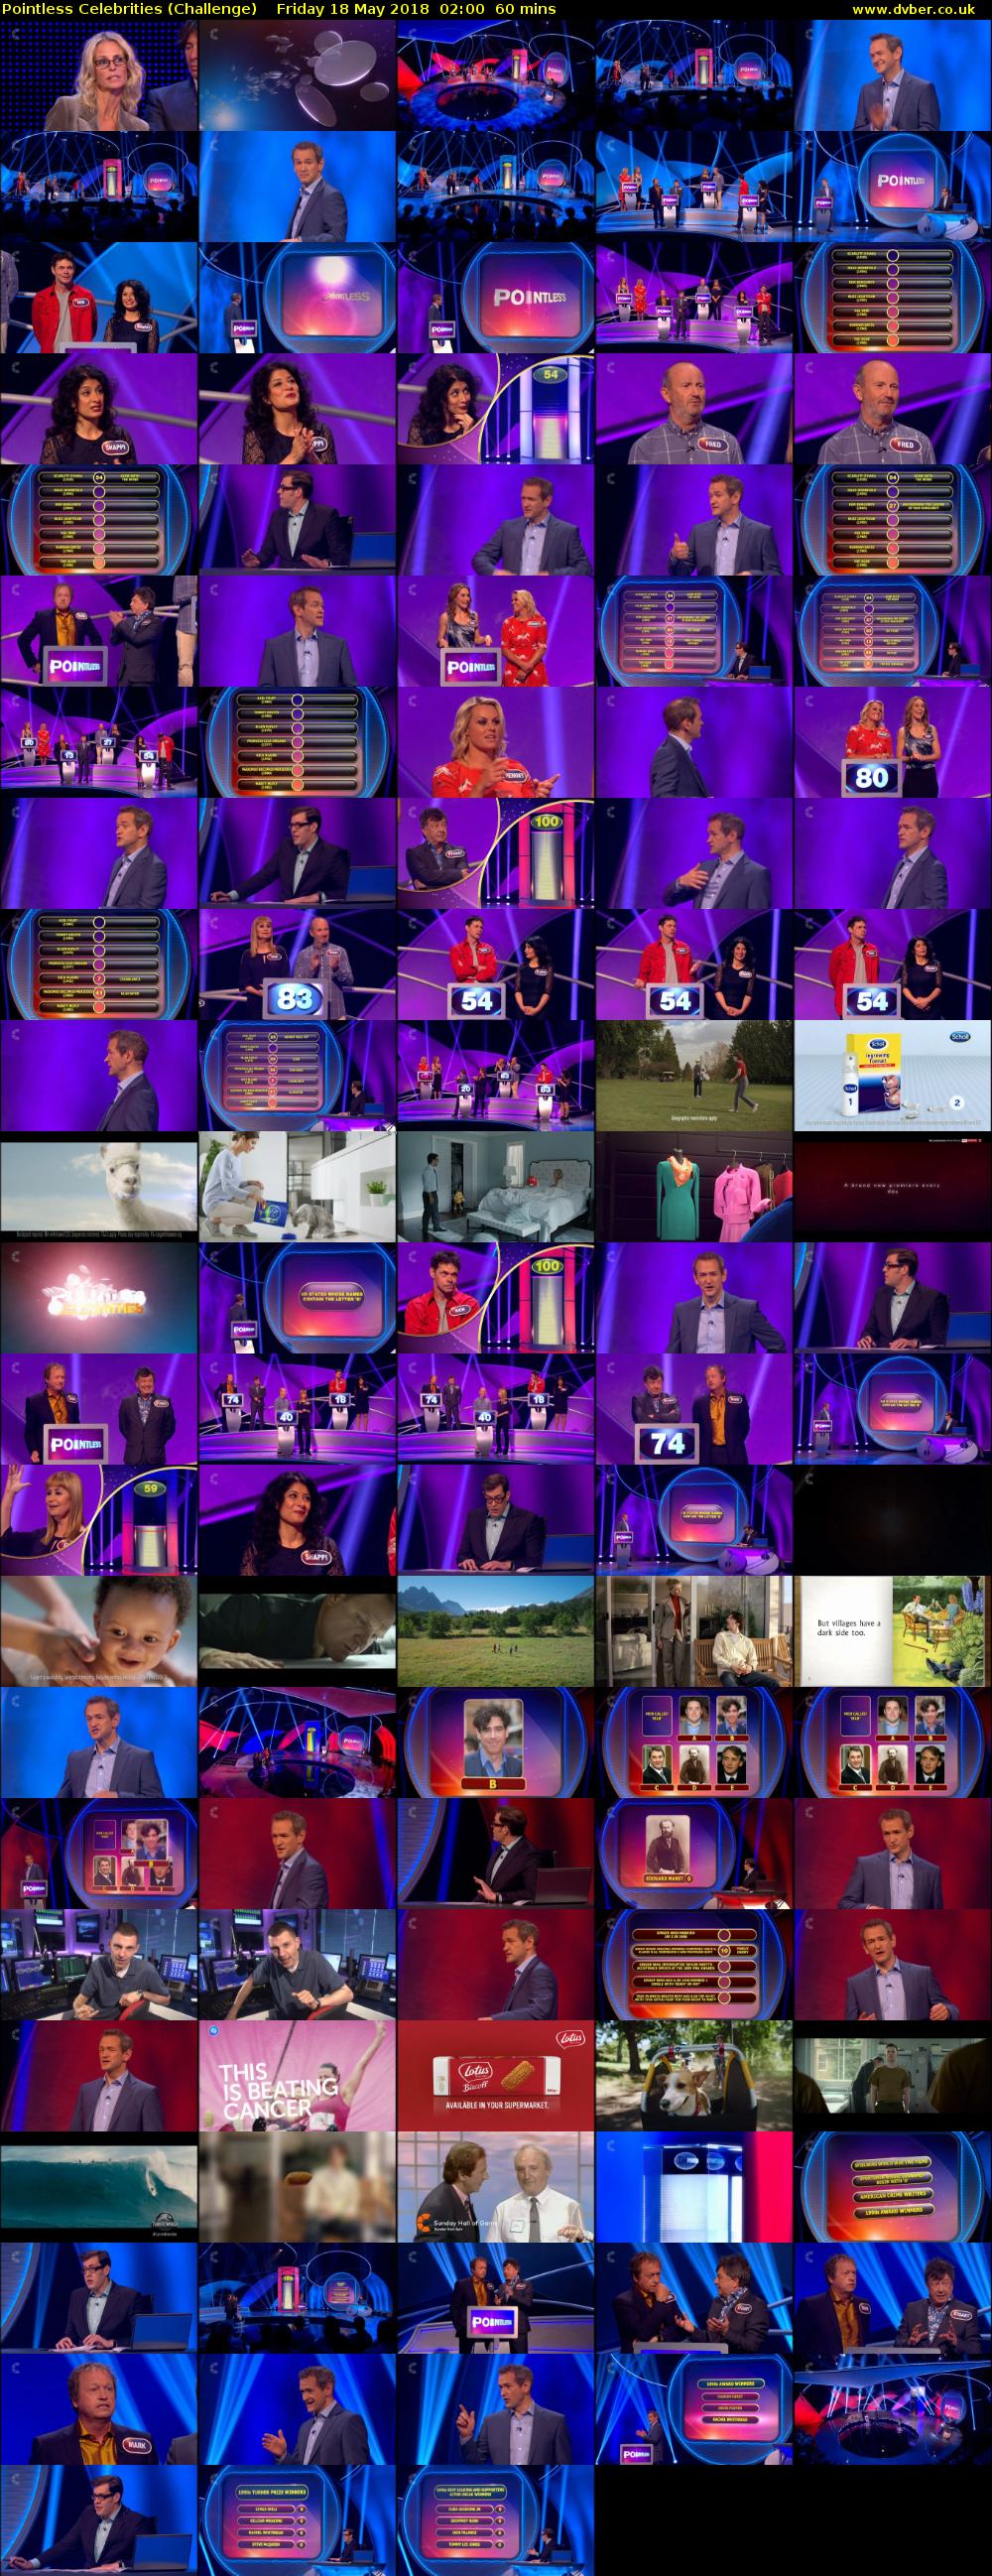 Pointless Celebrities (Challenge) Friday 18 May 2018 02:00 - 03:00